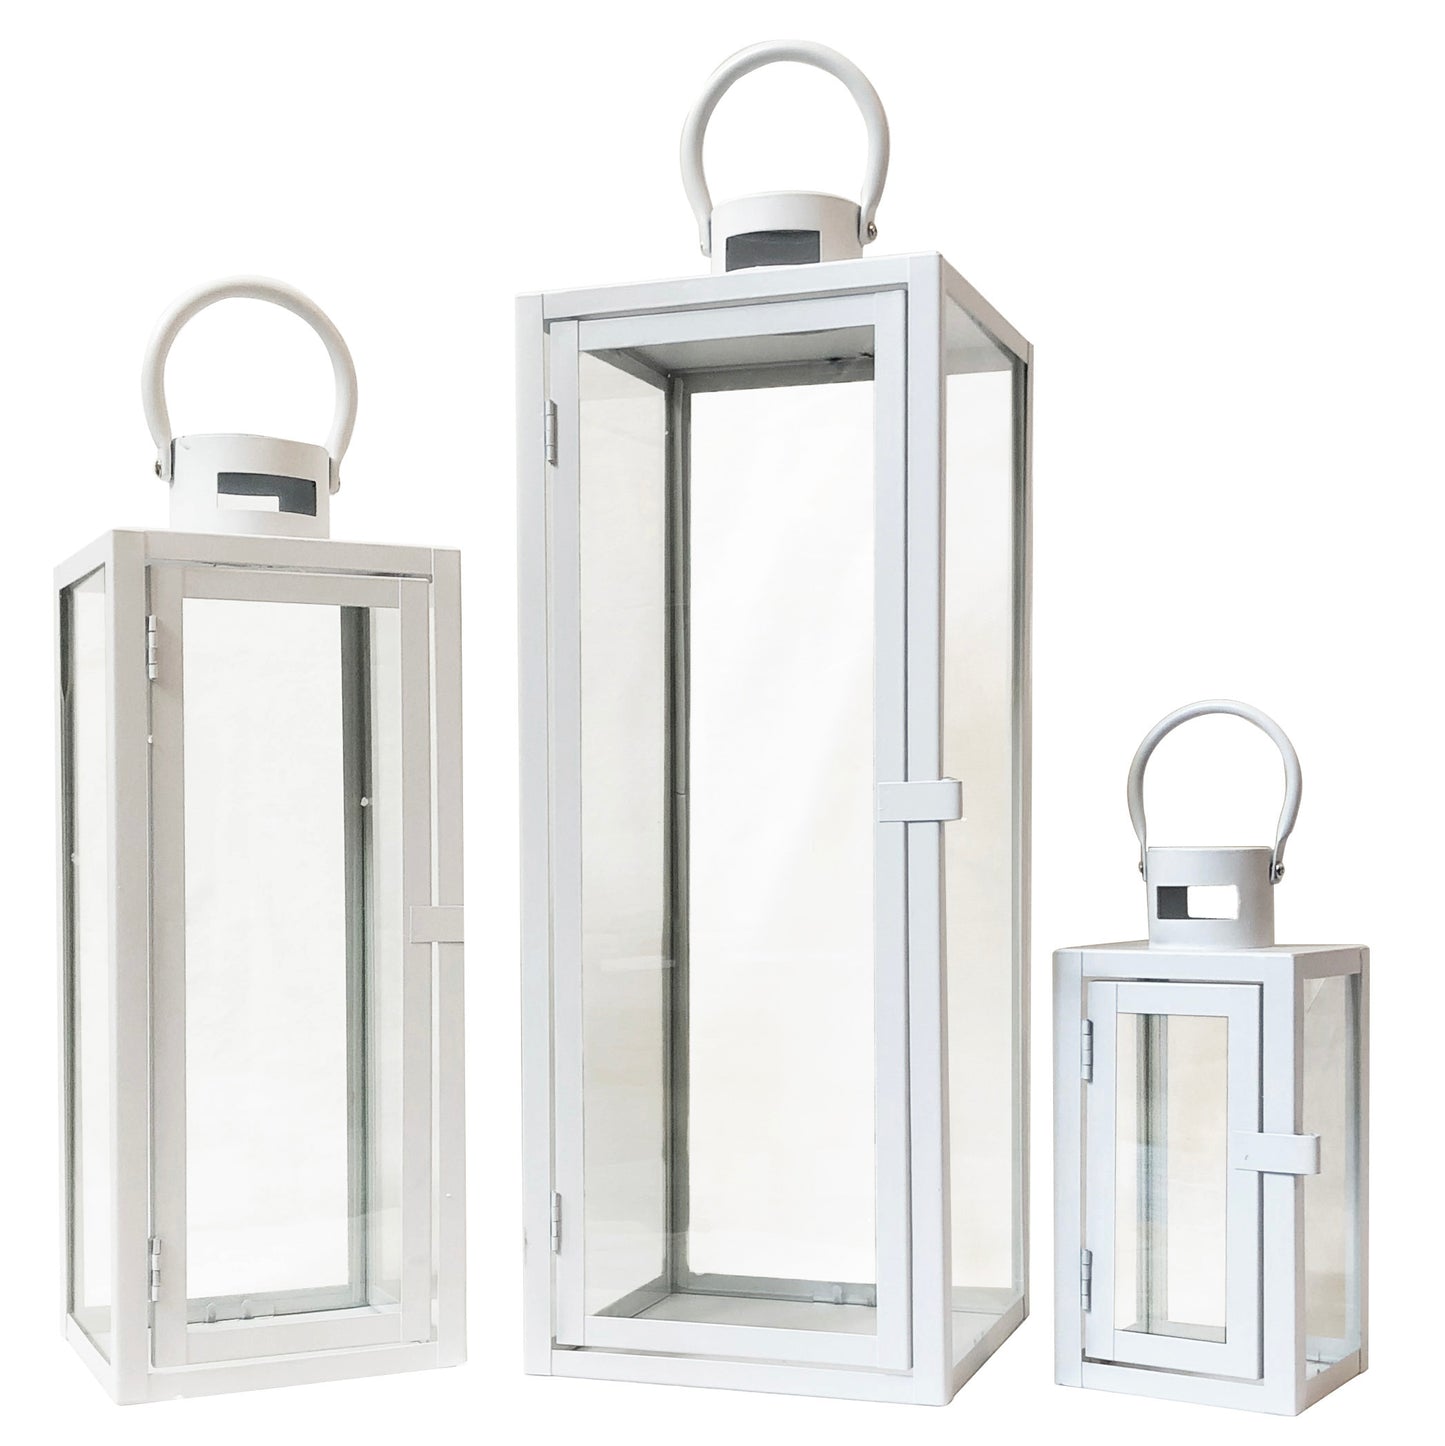 Allgala Lanterns 3-PC Set Jumbo Luxury Modern Indoor/Outdoor Hurricane Candle Lantern Set with Chrome Plated Structure and Tempered Glass-Cuboid